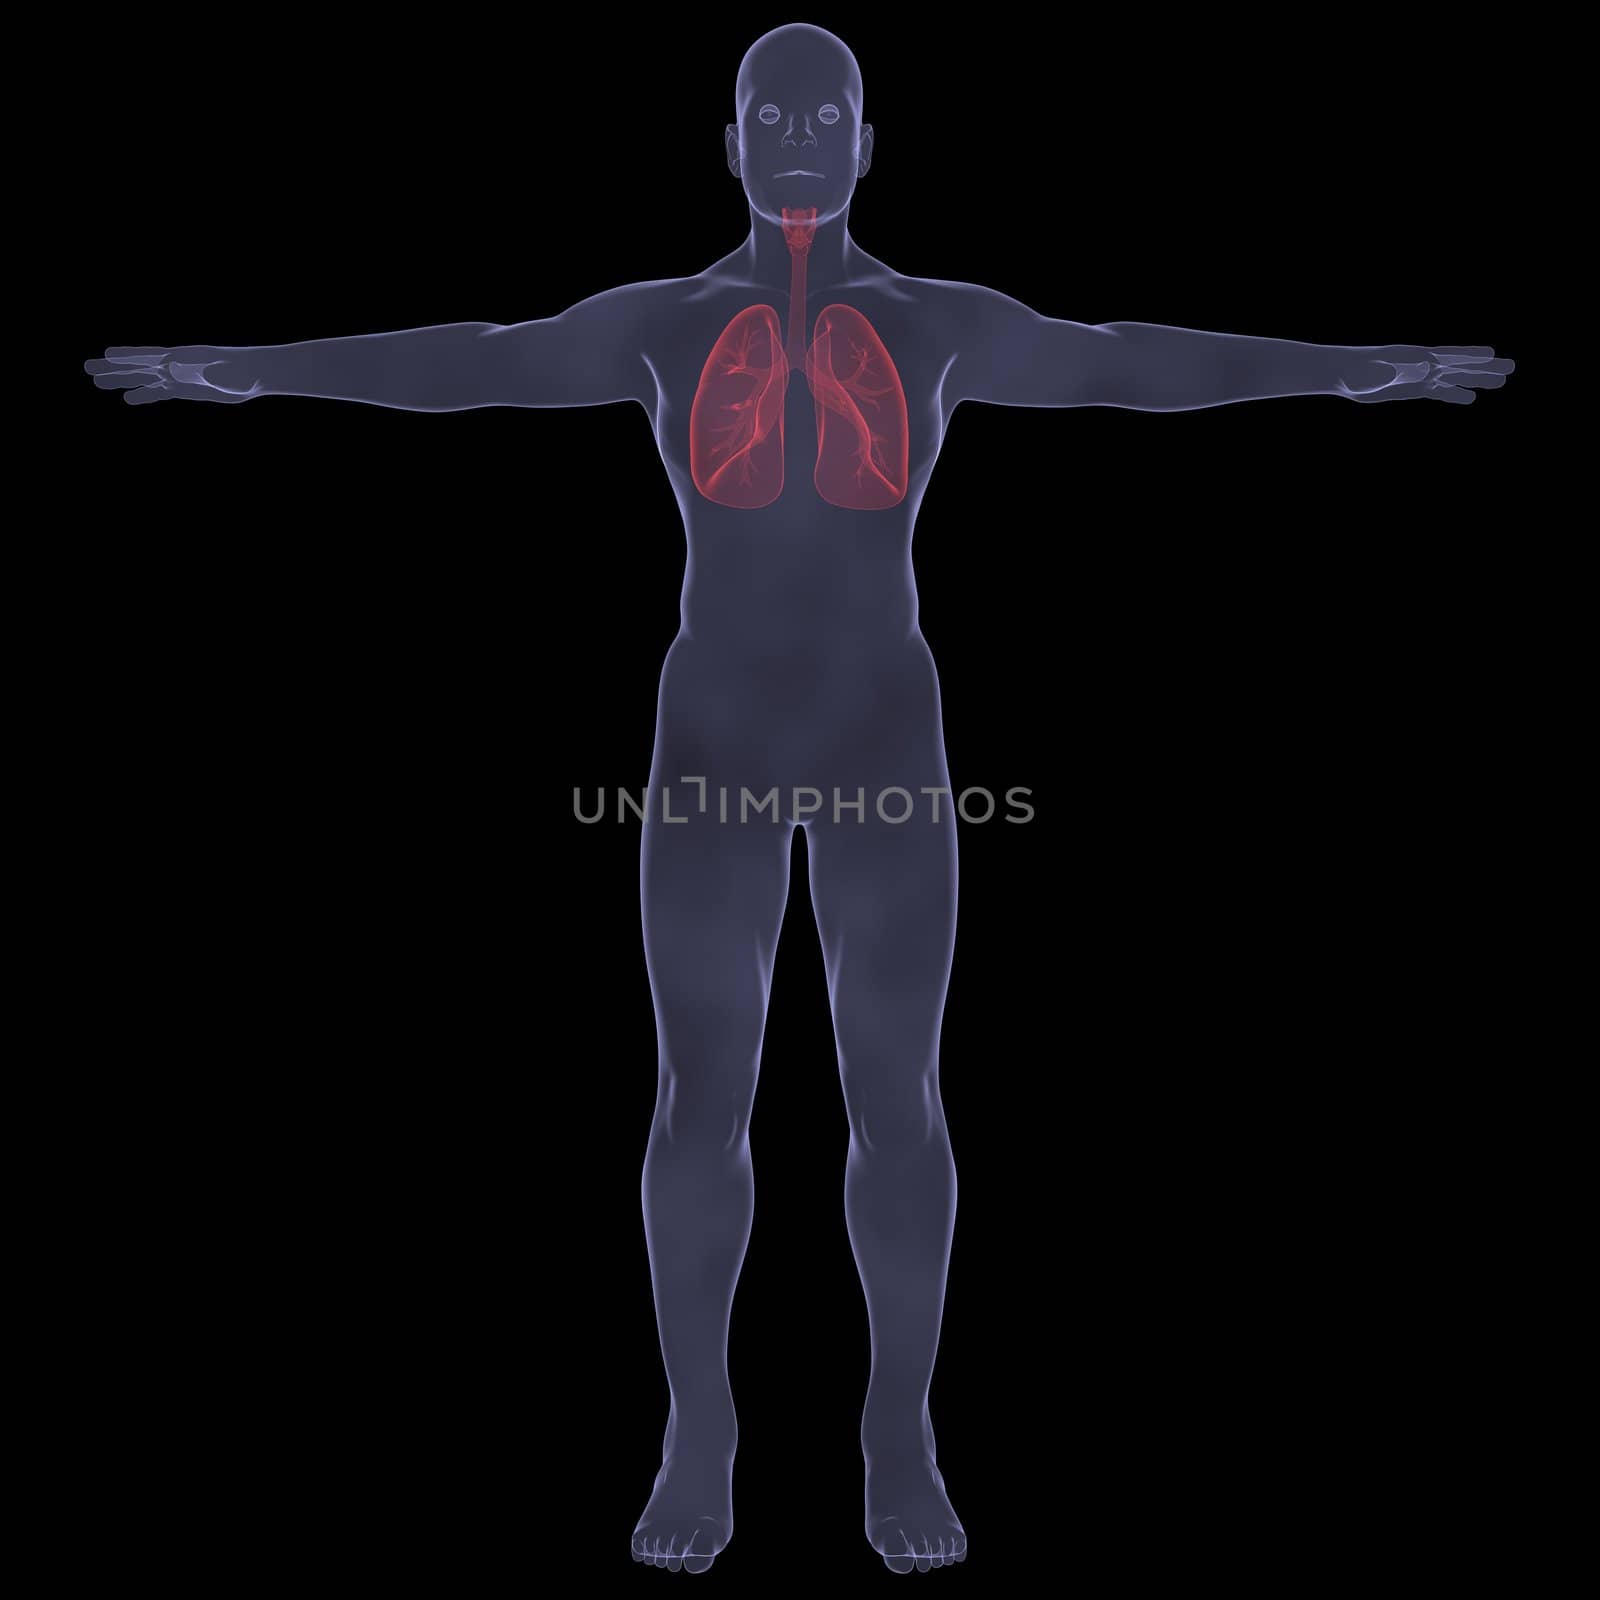 X-Ray picture of a person. lungs. Isolated render on a black background